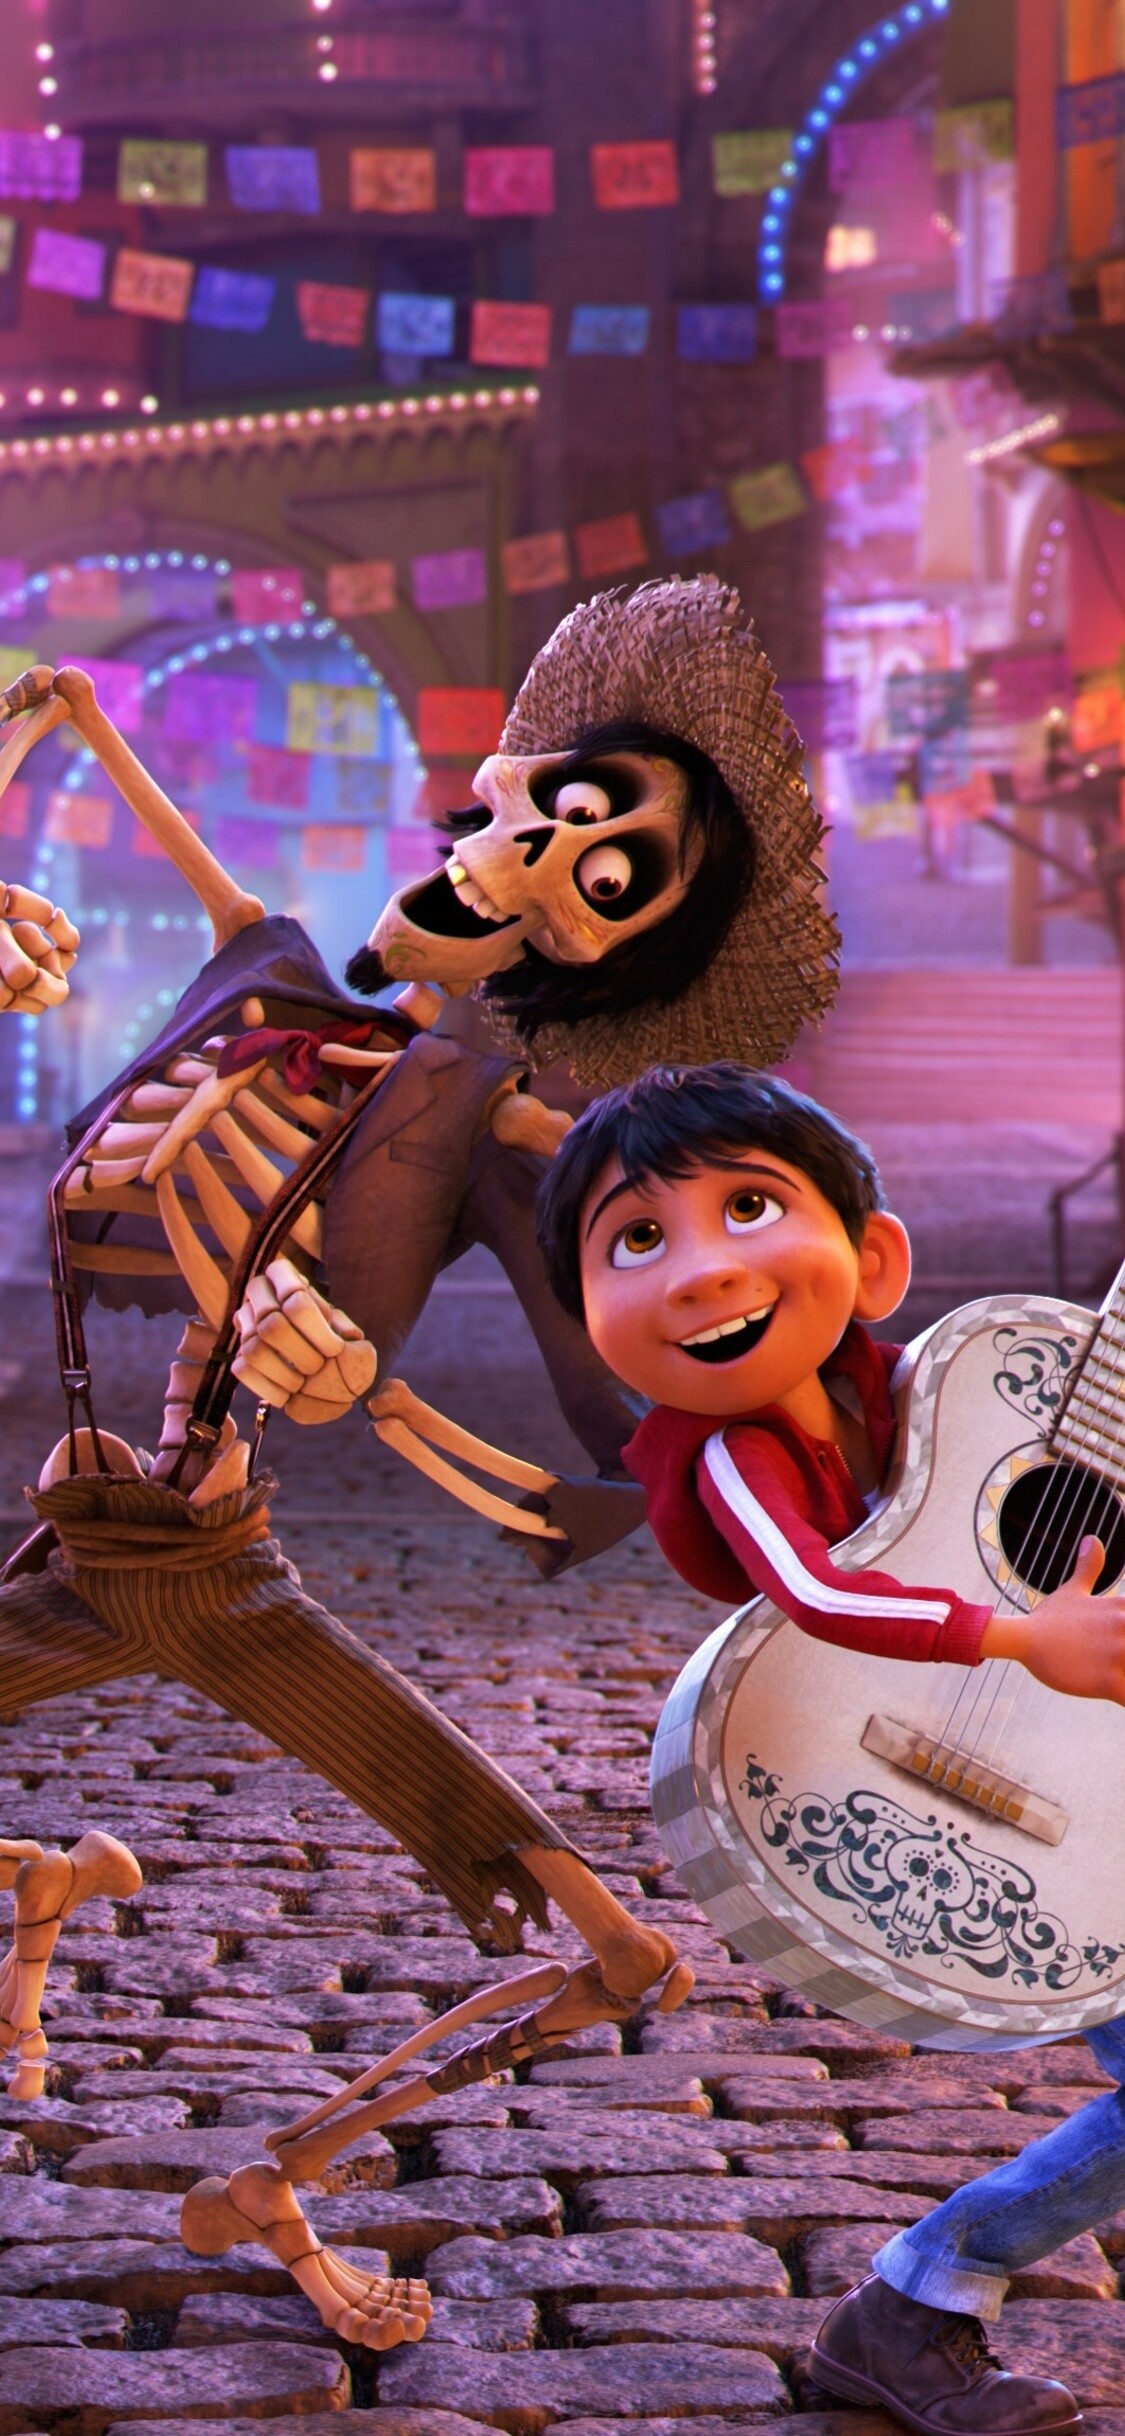 HD wallpaper, 4K Imagery, 1130X2440 Hd Phone, Coco Animated Movie Wallpaper, Iphone Hd Coco Cartoon Wallpaper Image, Iphone Xs Wallpaper, Stunning Visuals